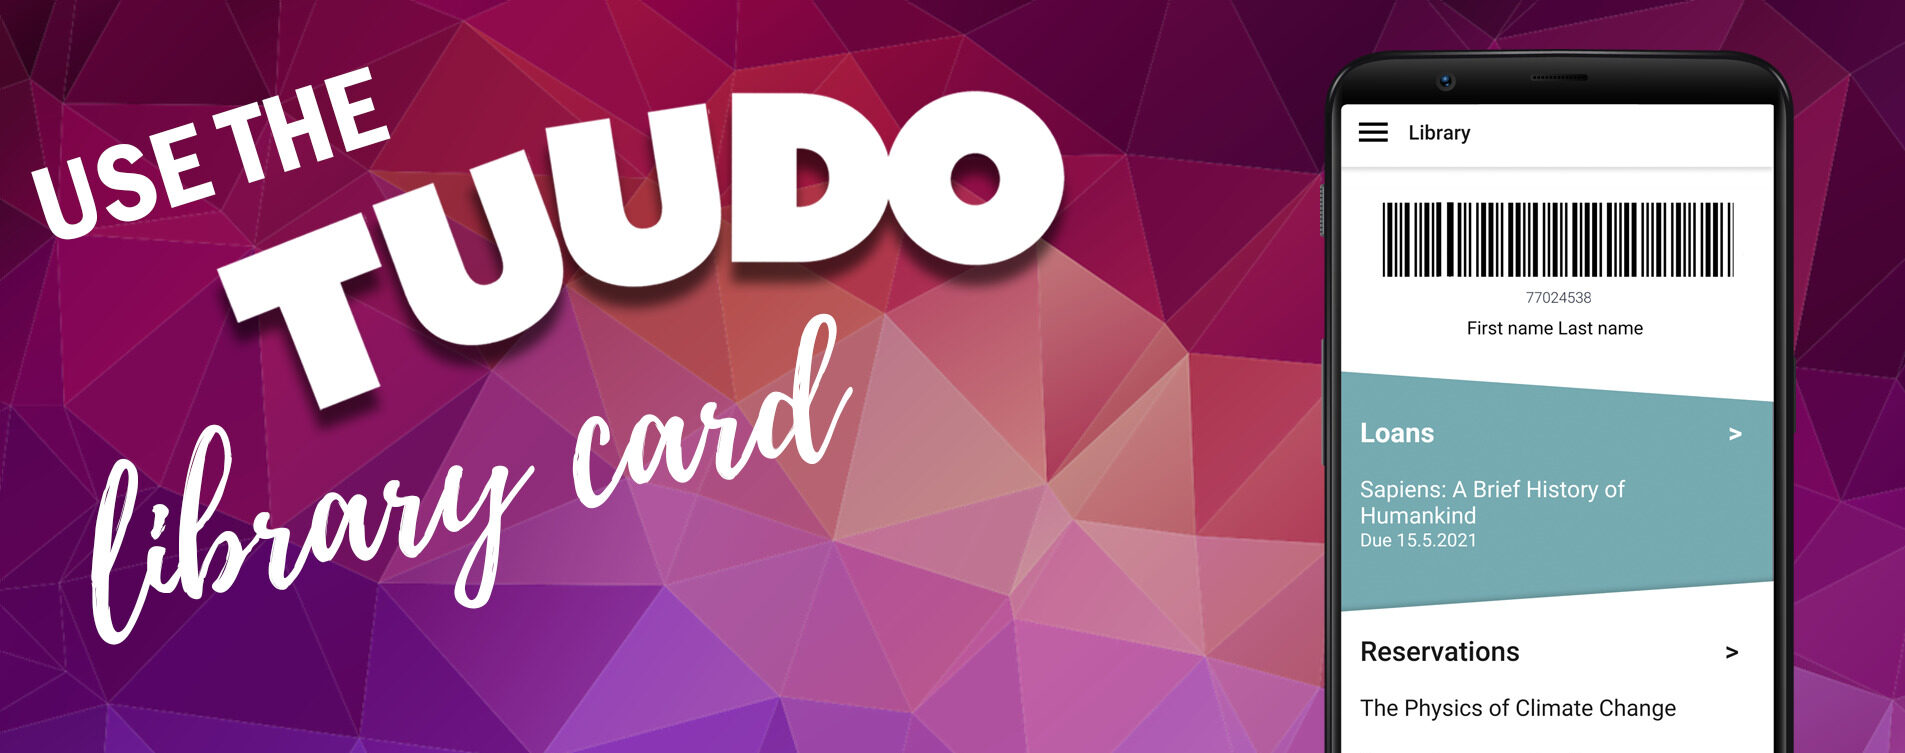 New student! Create your library card via Tuudo